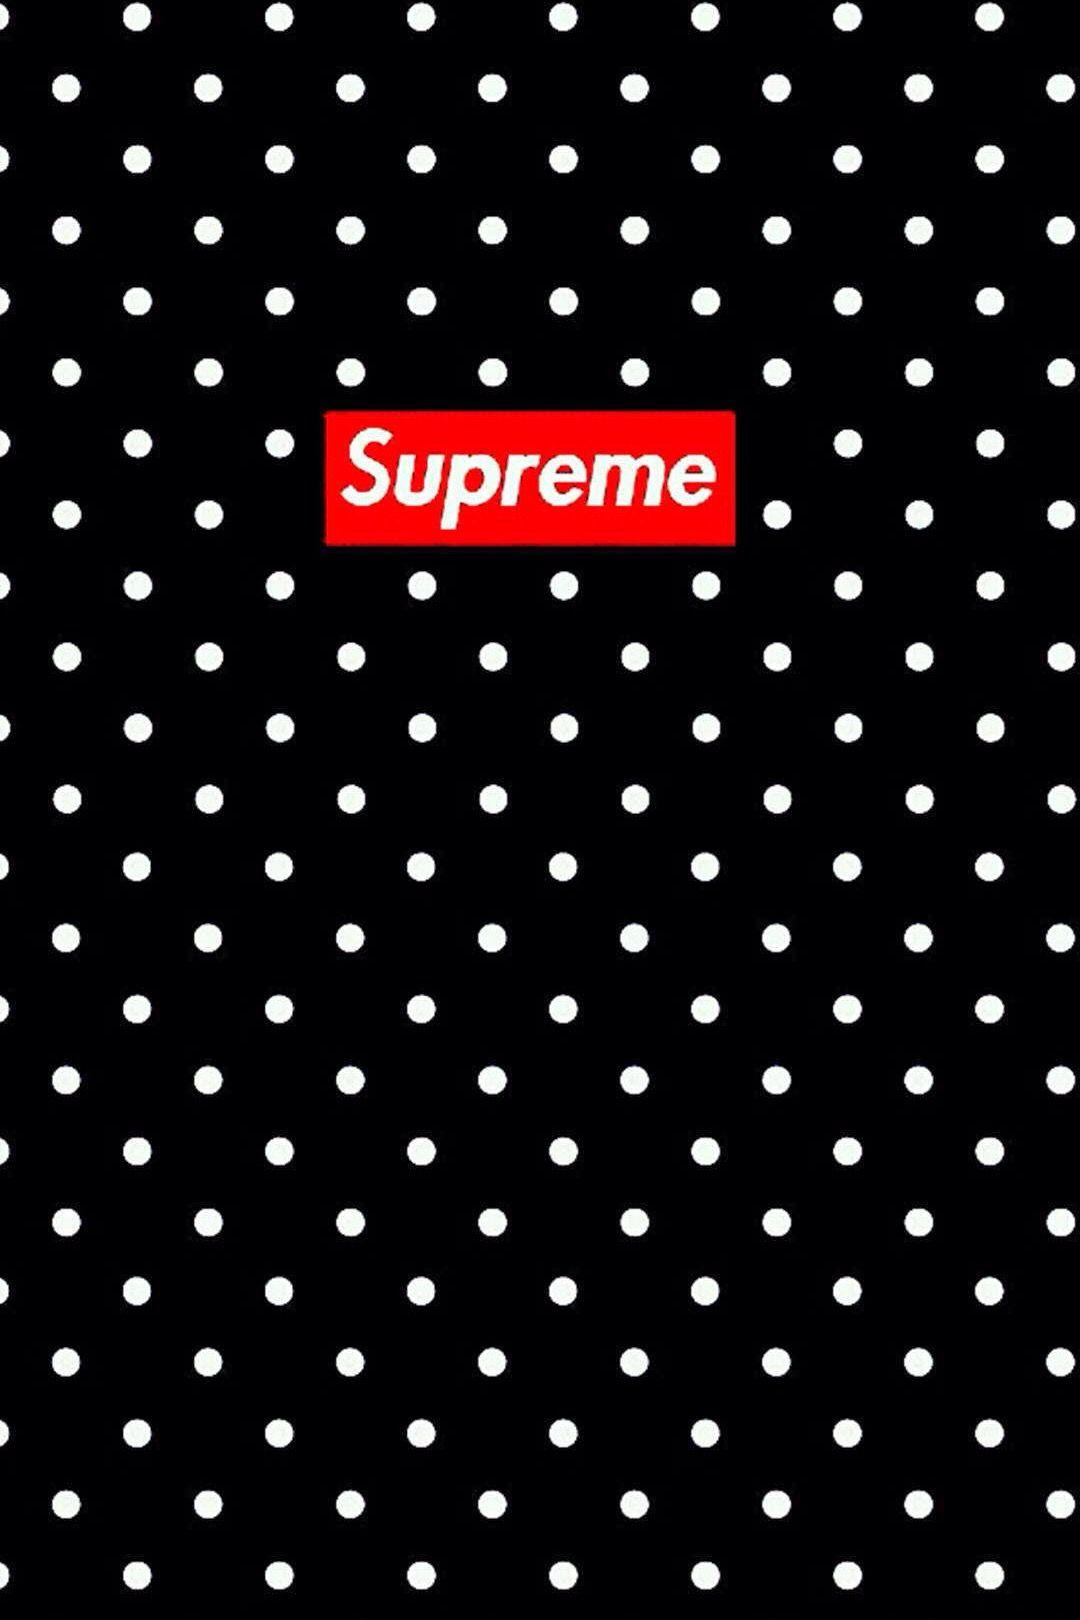 Supreme Lv Box Logo Wallpaper. Confederated Tribes of the Umatilla Indian Reservation